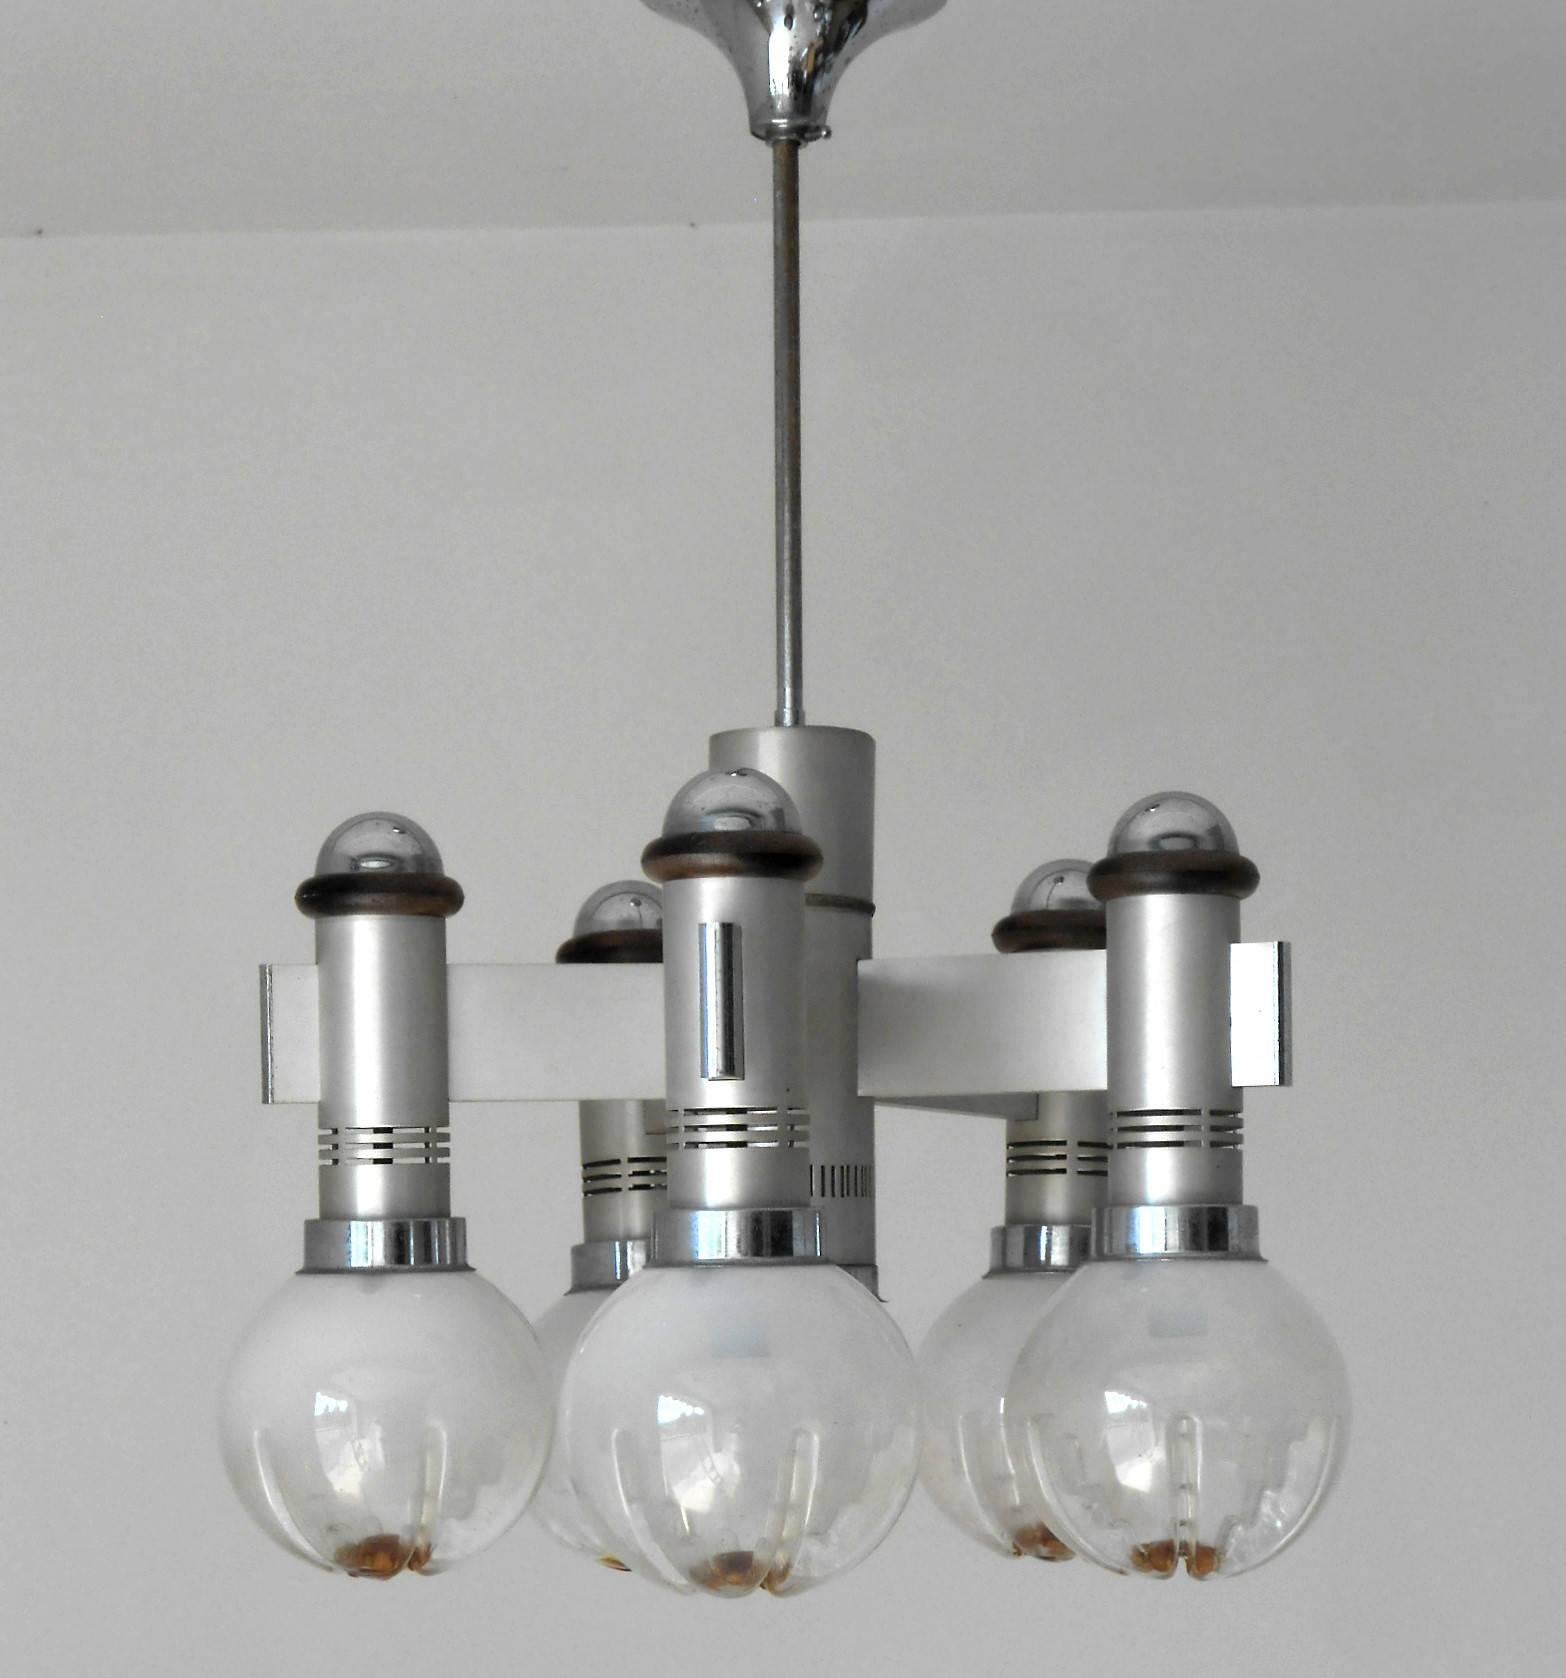 Original vintage Italian pendant with five lightly frosted Murano glass globes with amber details within each globe, mounted on chrome frame / Designed by Sciolari circa 1960’s / Made in Italy 
5 lights / E12 or E14 type / max 40W each
Diameter: